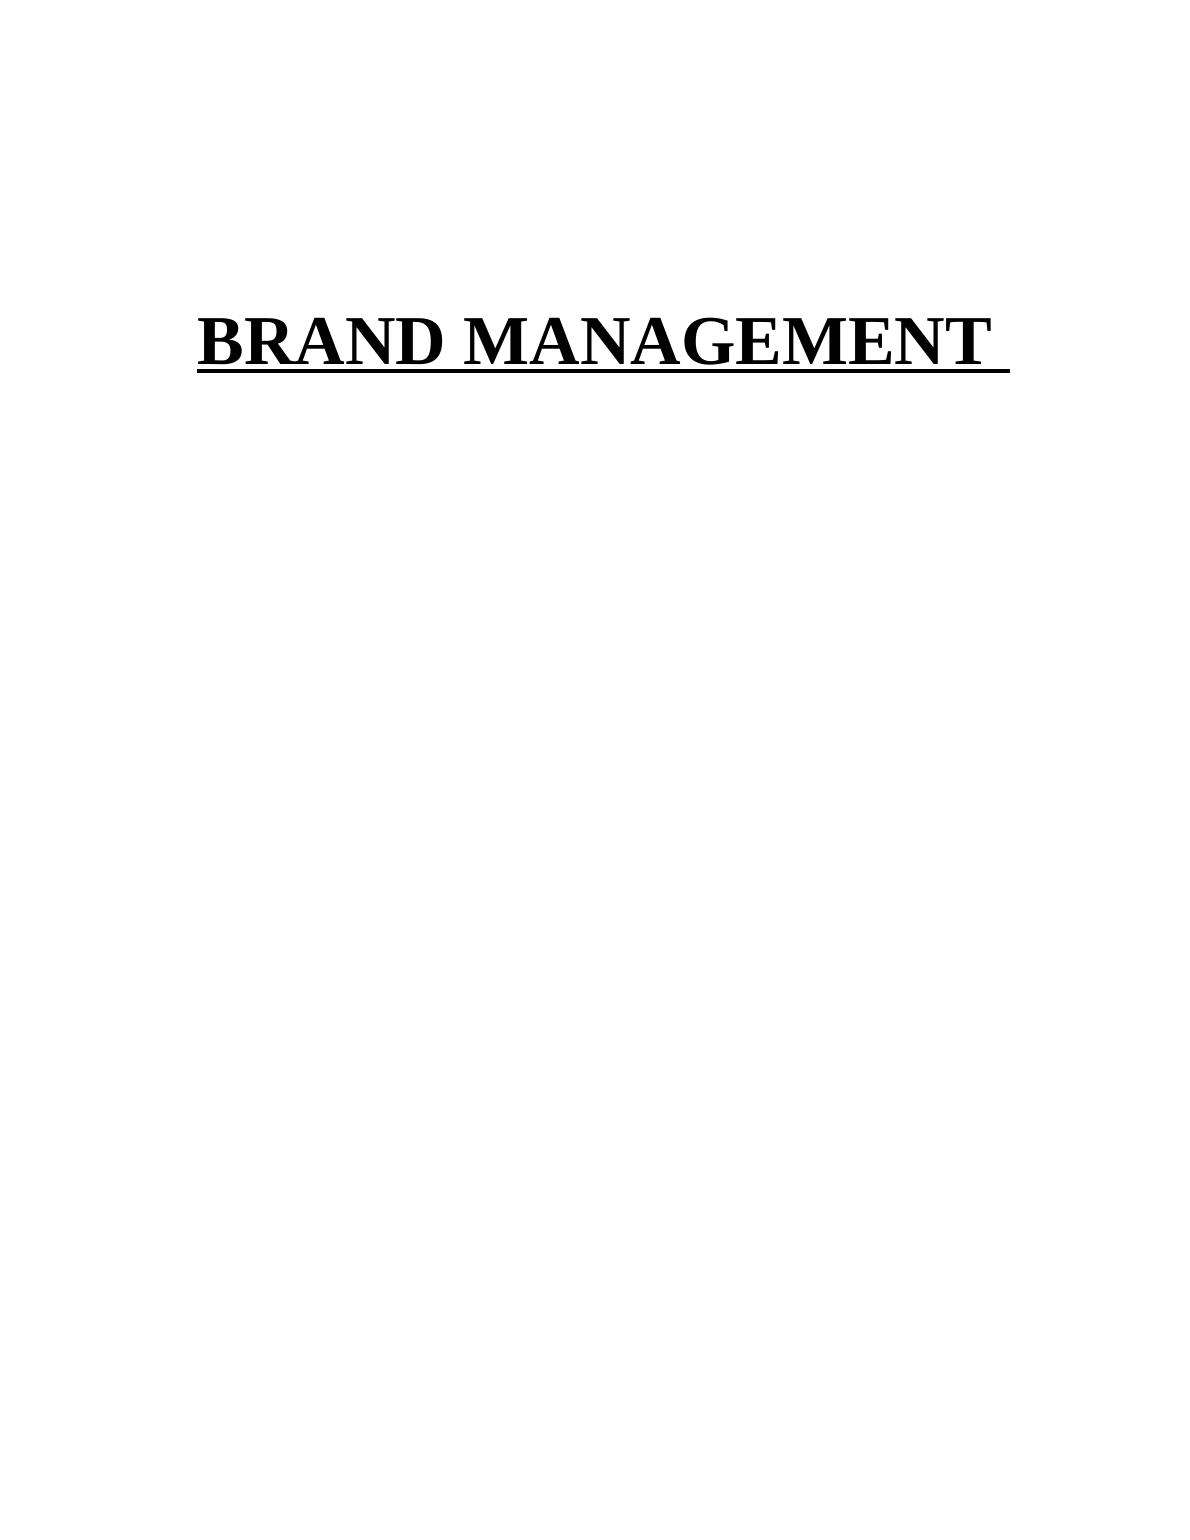 Brand Management Strategies and Hierarchy_1